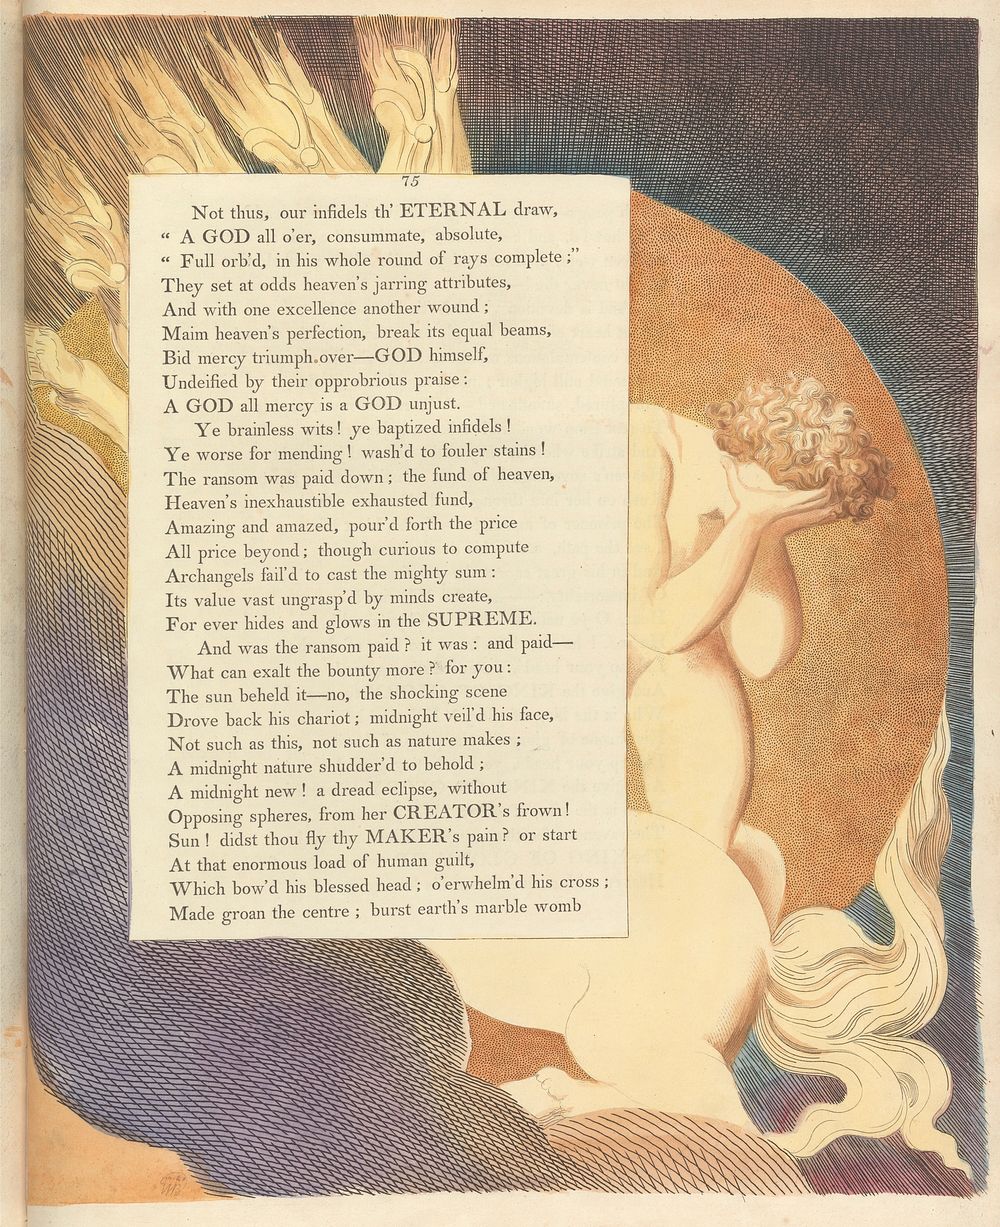 Young's Night Thoughts, Page 75, "The Sun beheld it -- No, the shocking Scene" by William Blake.